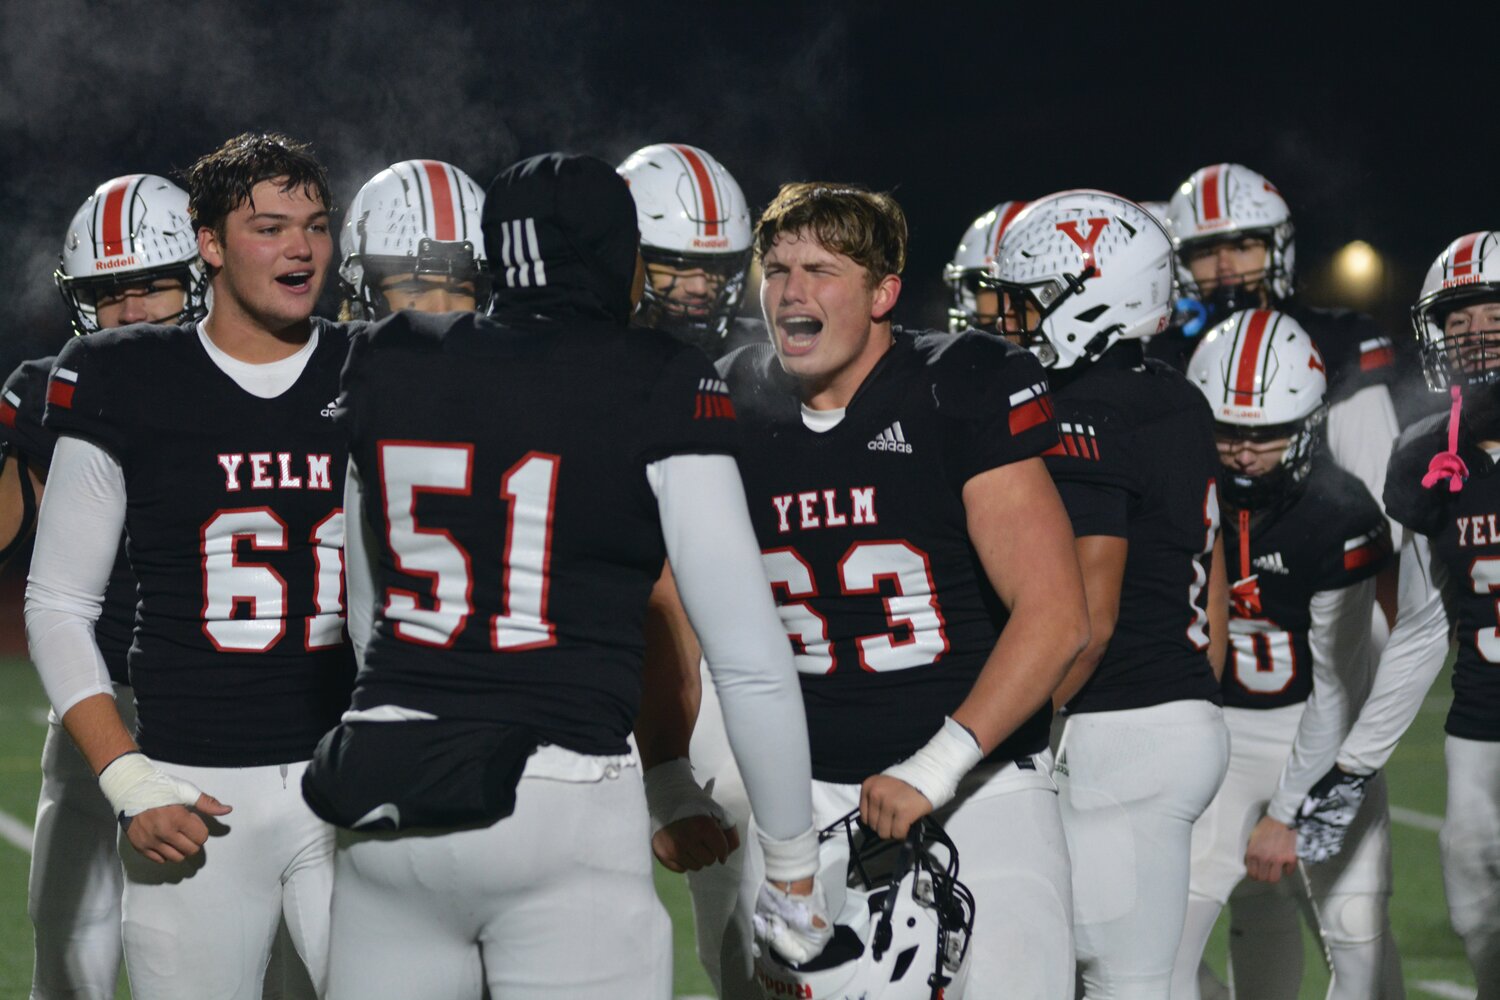 Yelm linemen Chris Hauss (61), Damien Williams-Butler (51), and Jonah Smith (63) celebrate on Nov. 25 after defeating the Eastside Catholic Crusaders 7-0 to advance to the 3A State Championship game against Bellevue.